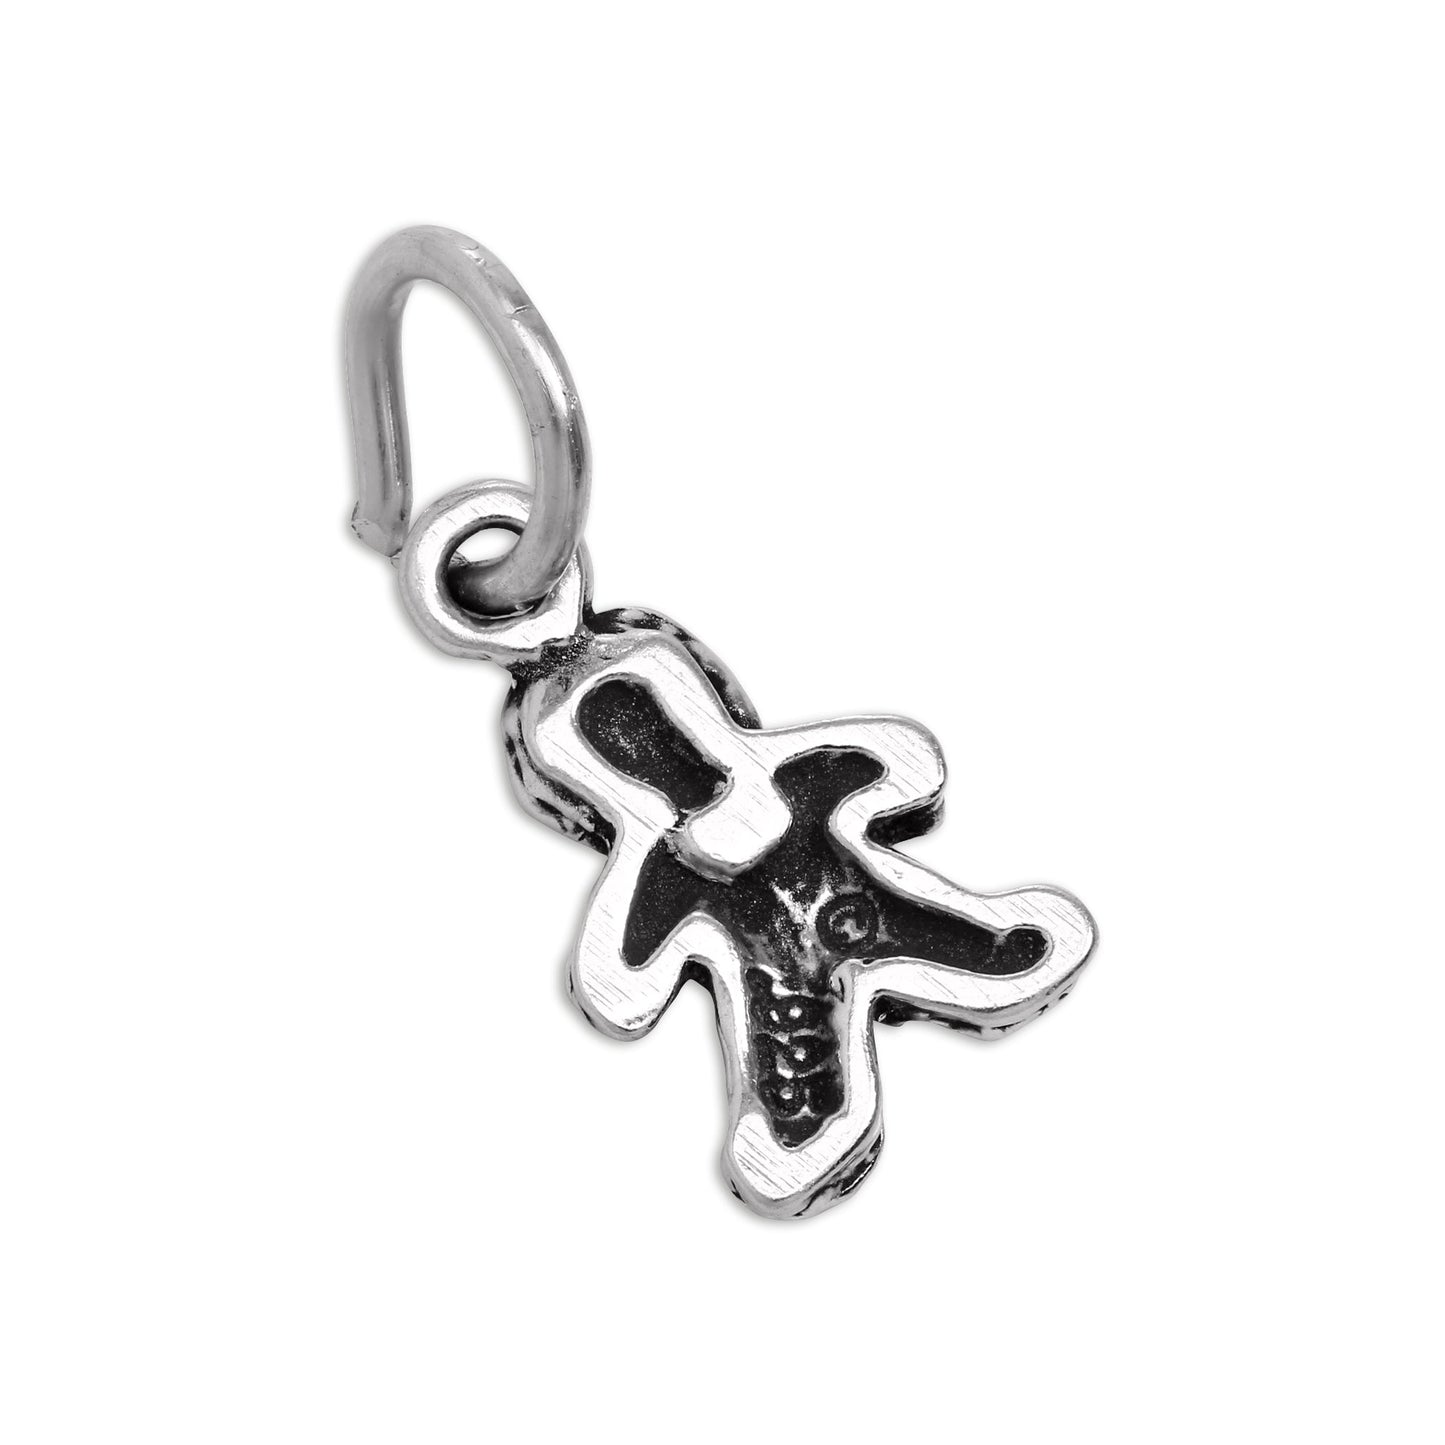 Tiny Sterling Silver Gingerbread Man Charm